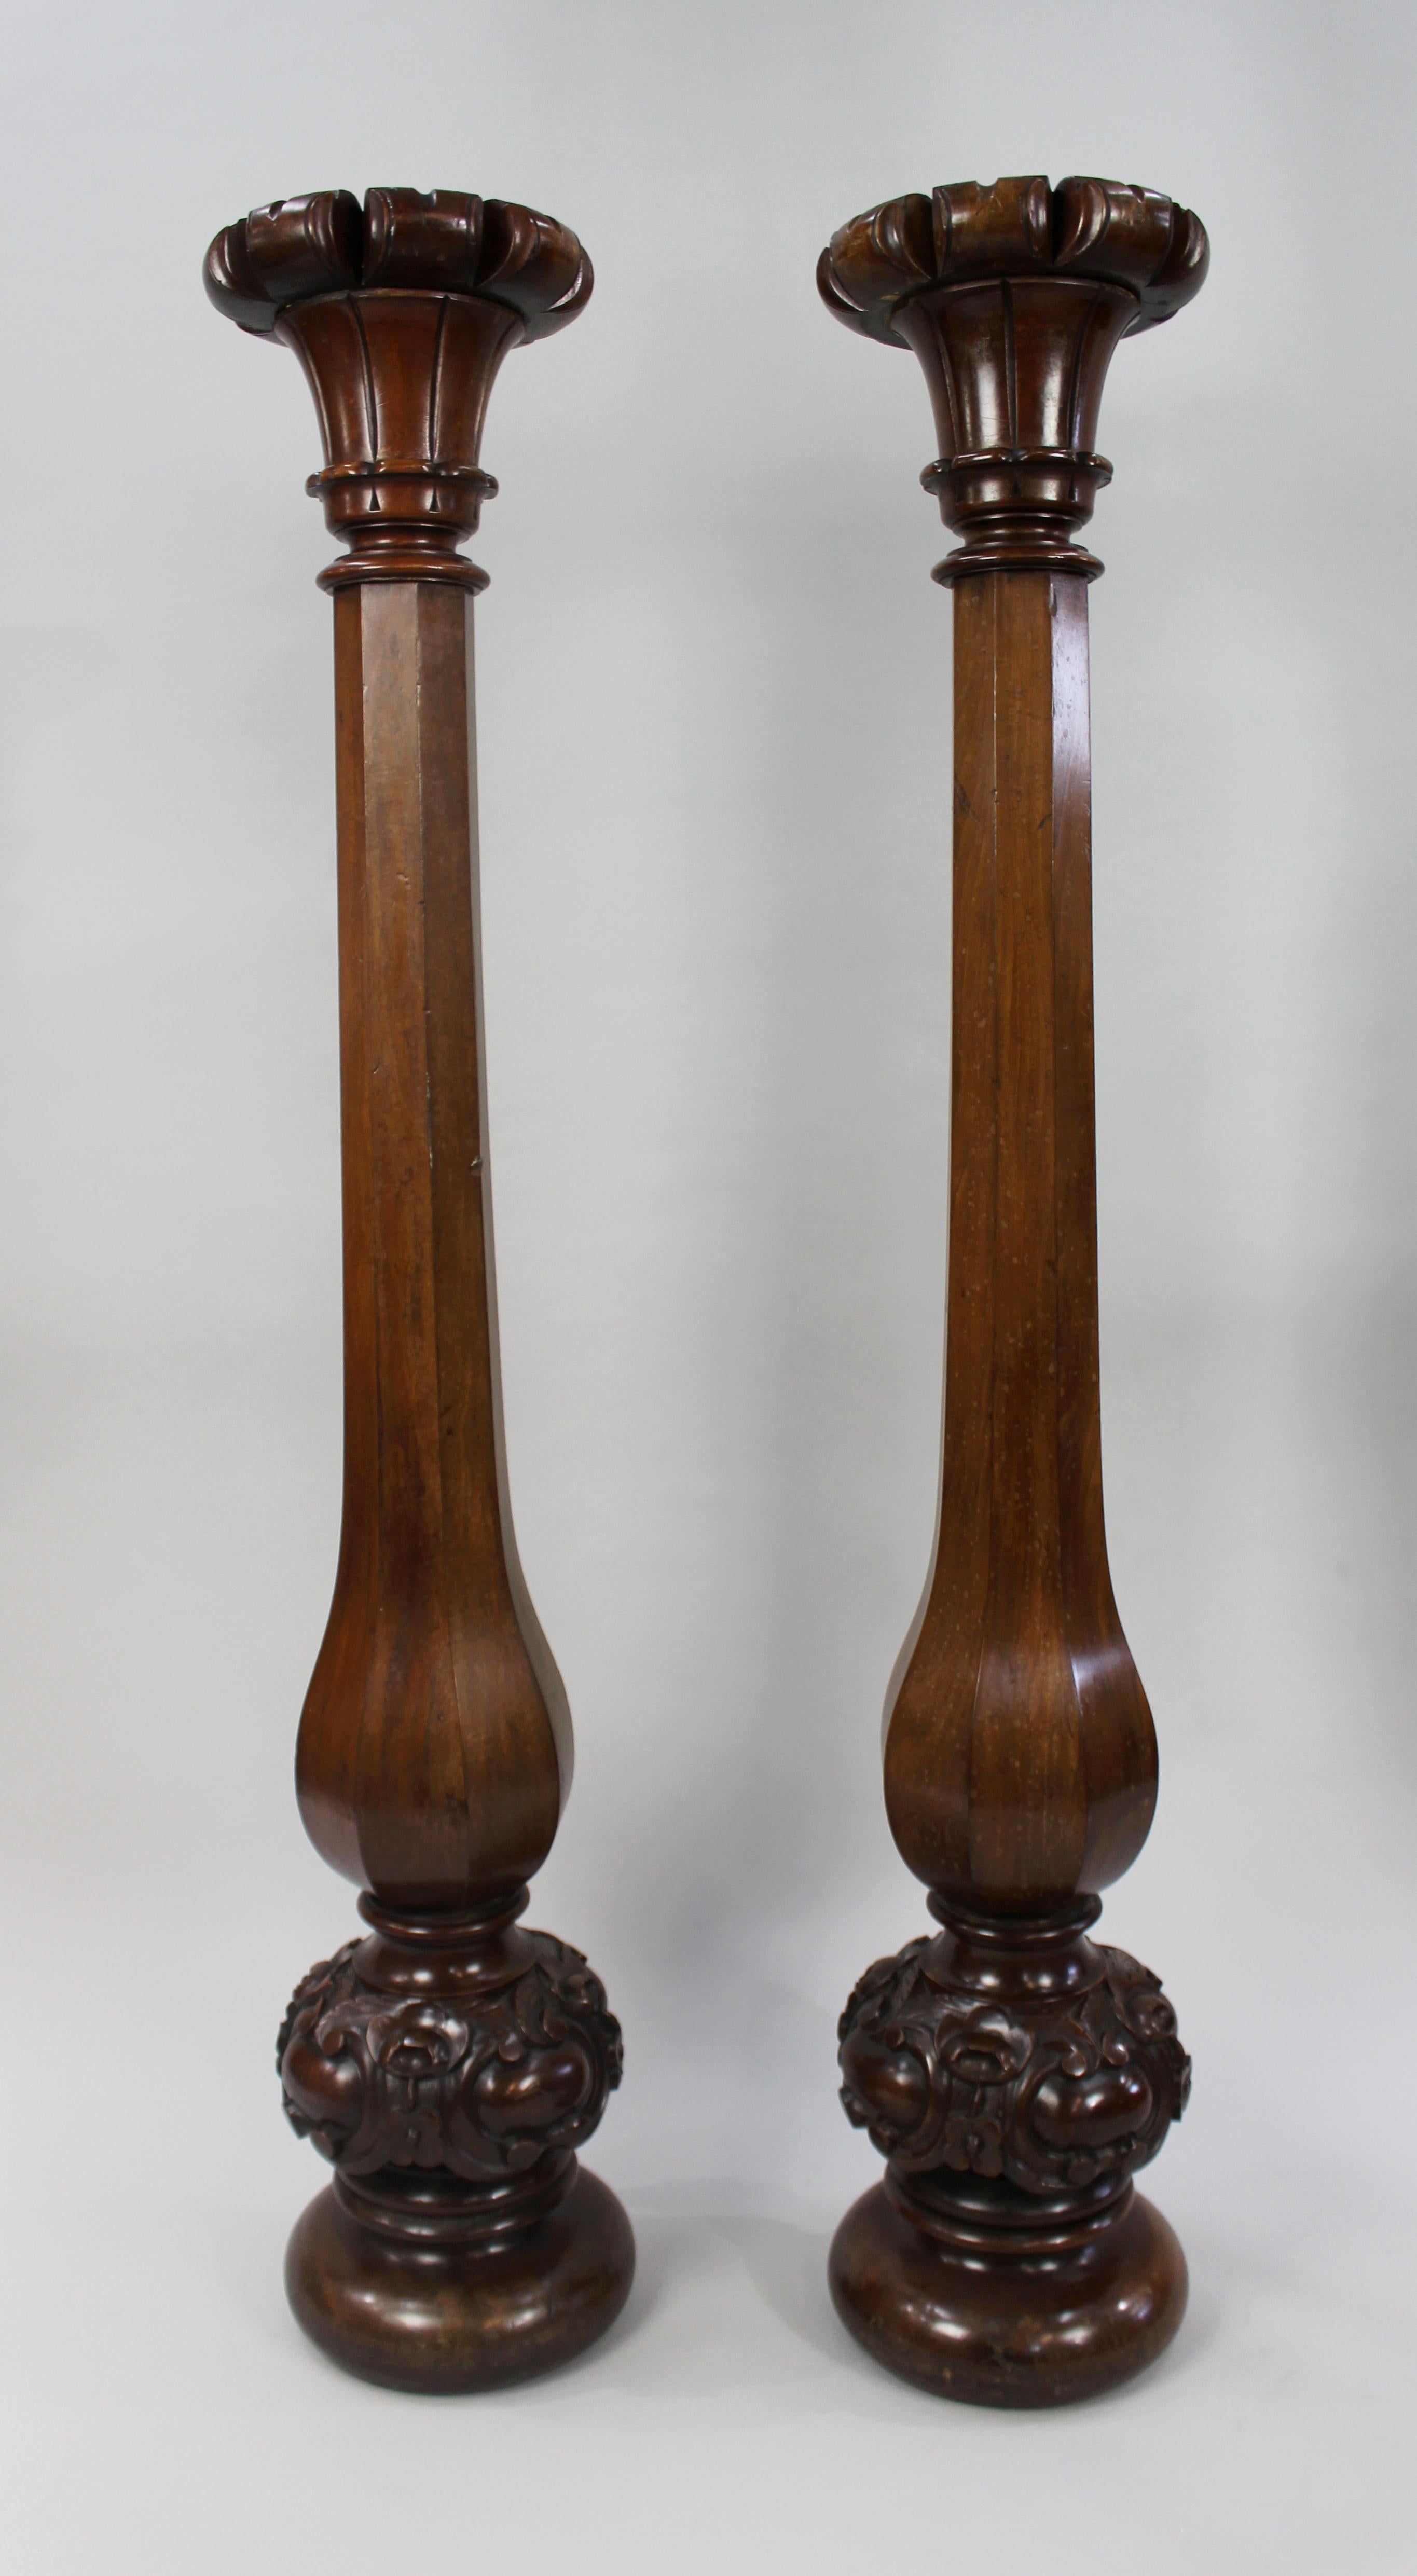 Pair of early Victorian varved Mahogany pedestals


Period Victorian c.1850

Wood carved mahogany

Condition Good condition. Sound structure. A few old non structural cracks and some marks to finish
 

Pair of finely carved mahogany post